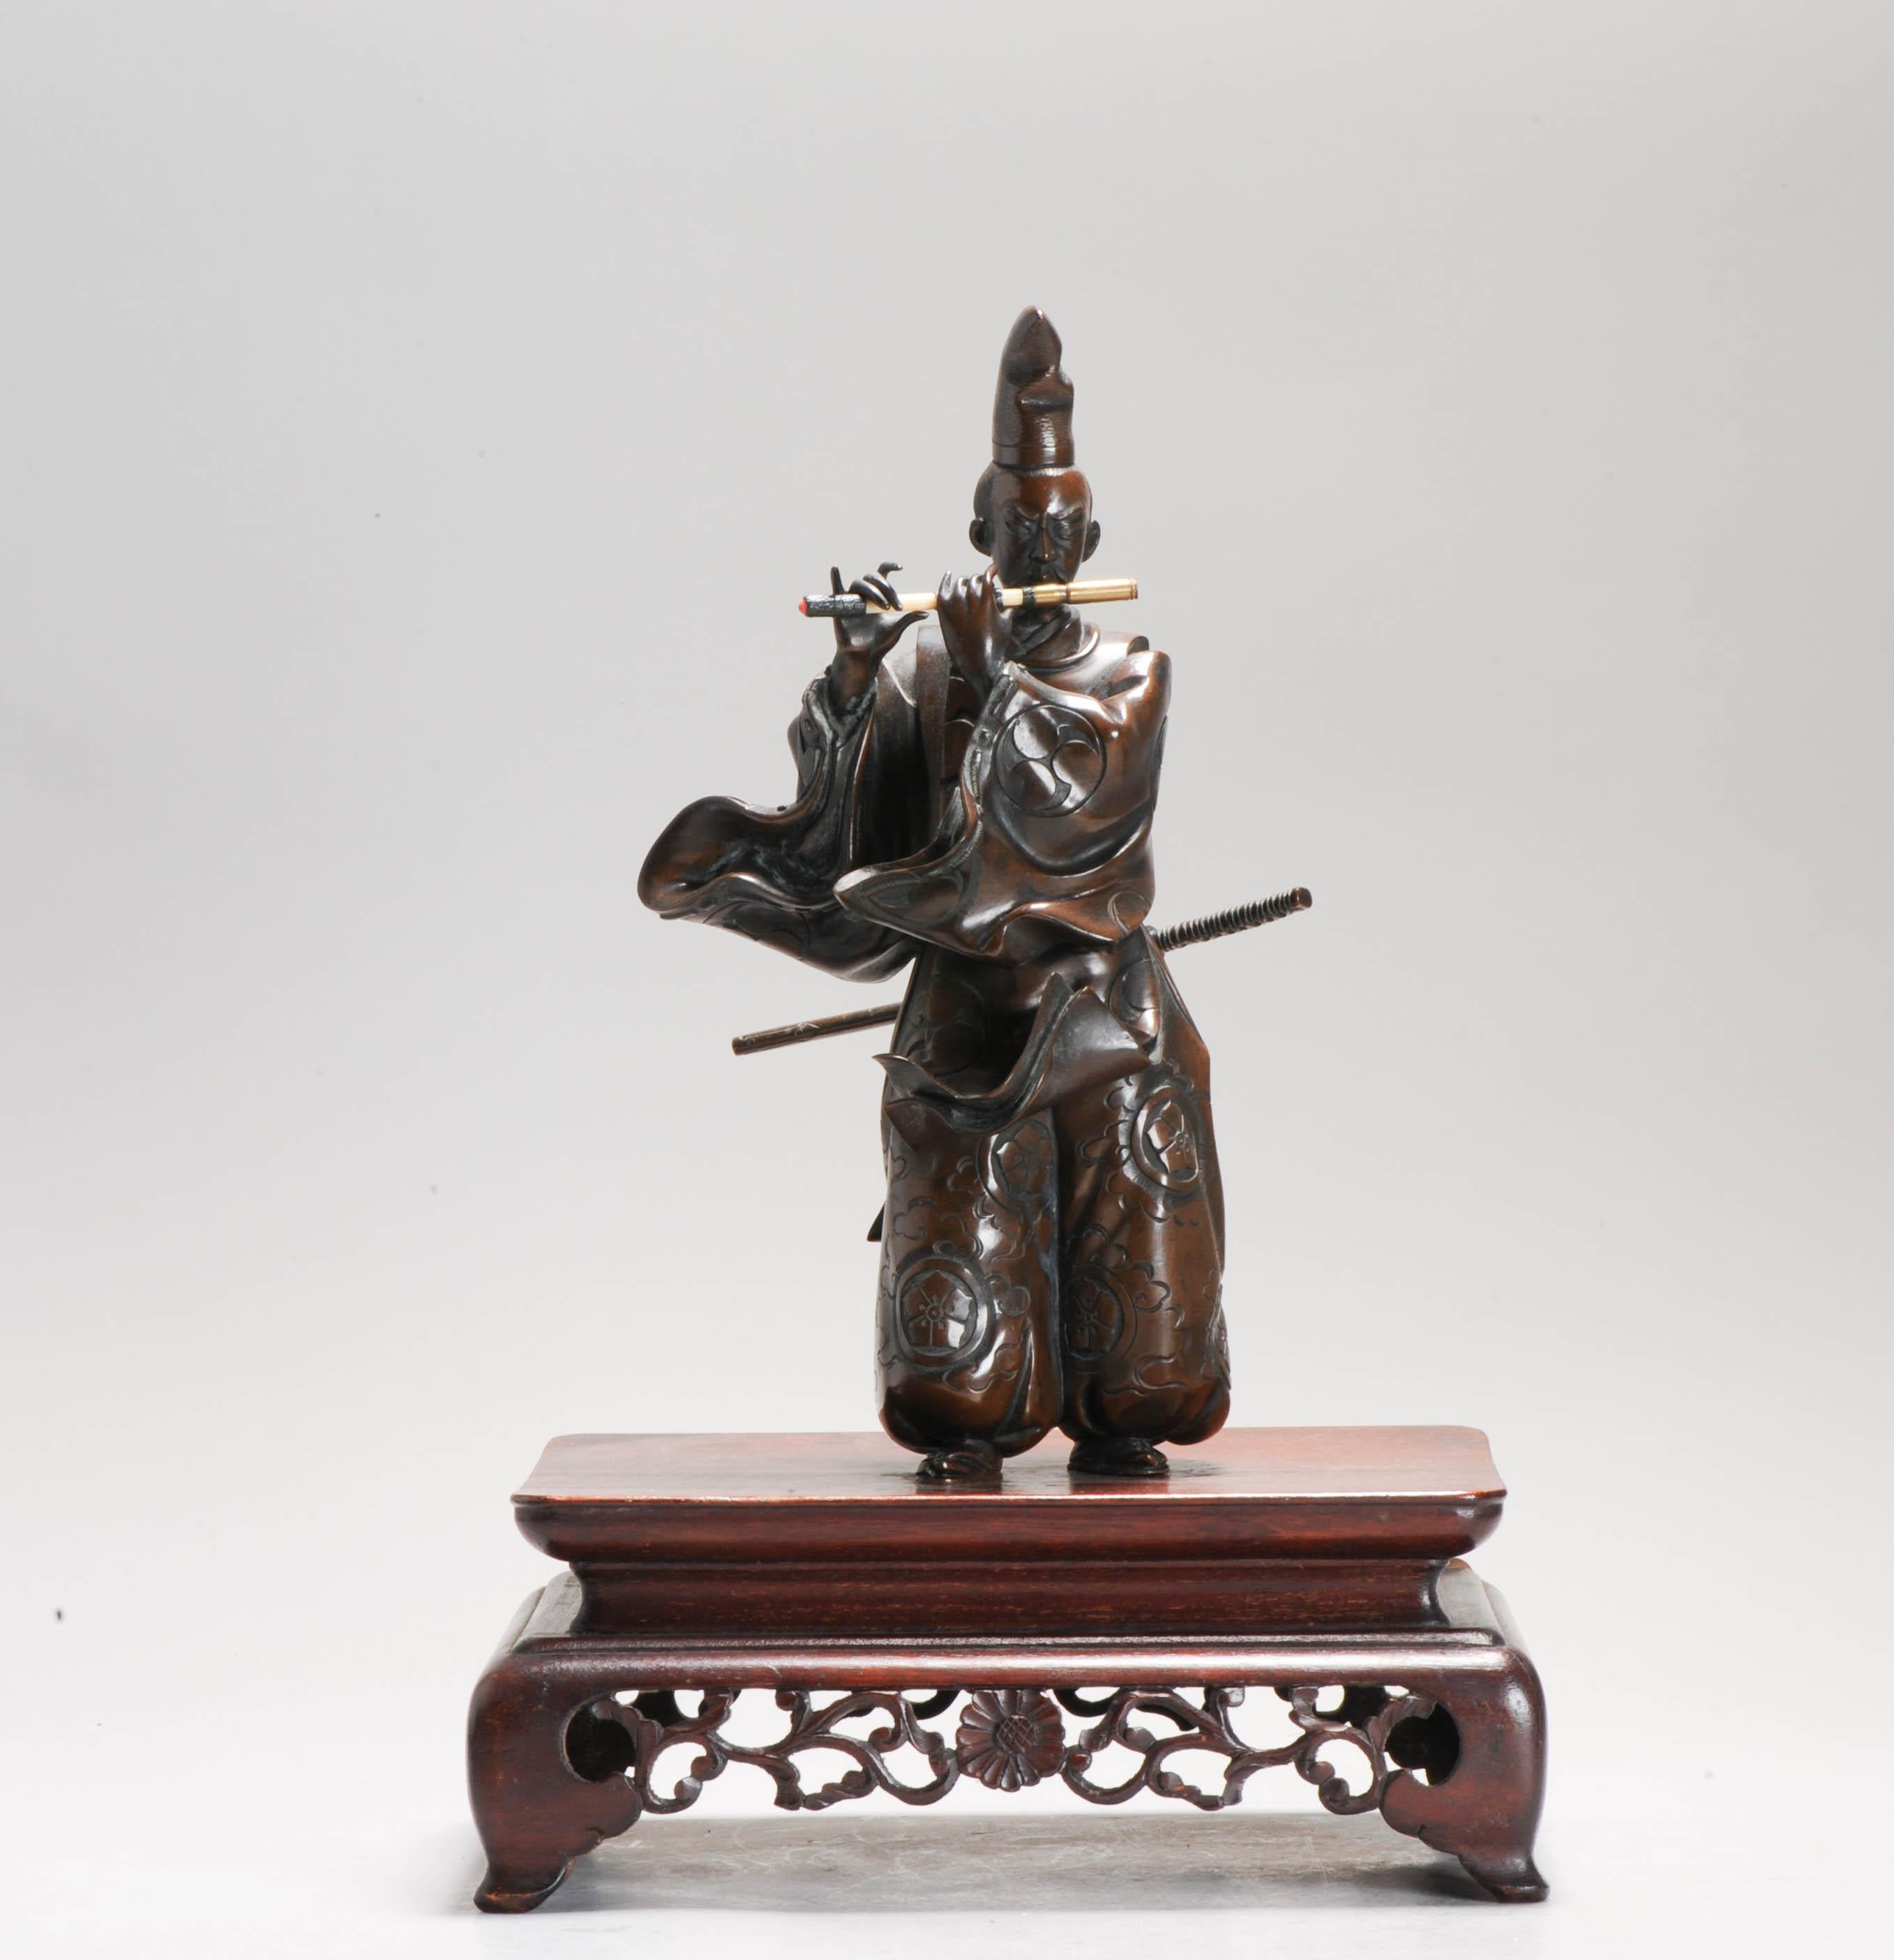 JAPAN - MEIJI period (1868 - 1912) Pair of bronze candlesticks with brown patina with copper and gilded bronze inlays depicting two standing women carrying lotus branches forming a candlestick, posing on quadripod bases decorated with lotus scrolls.